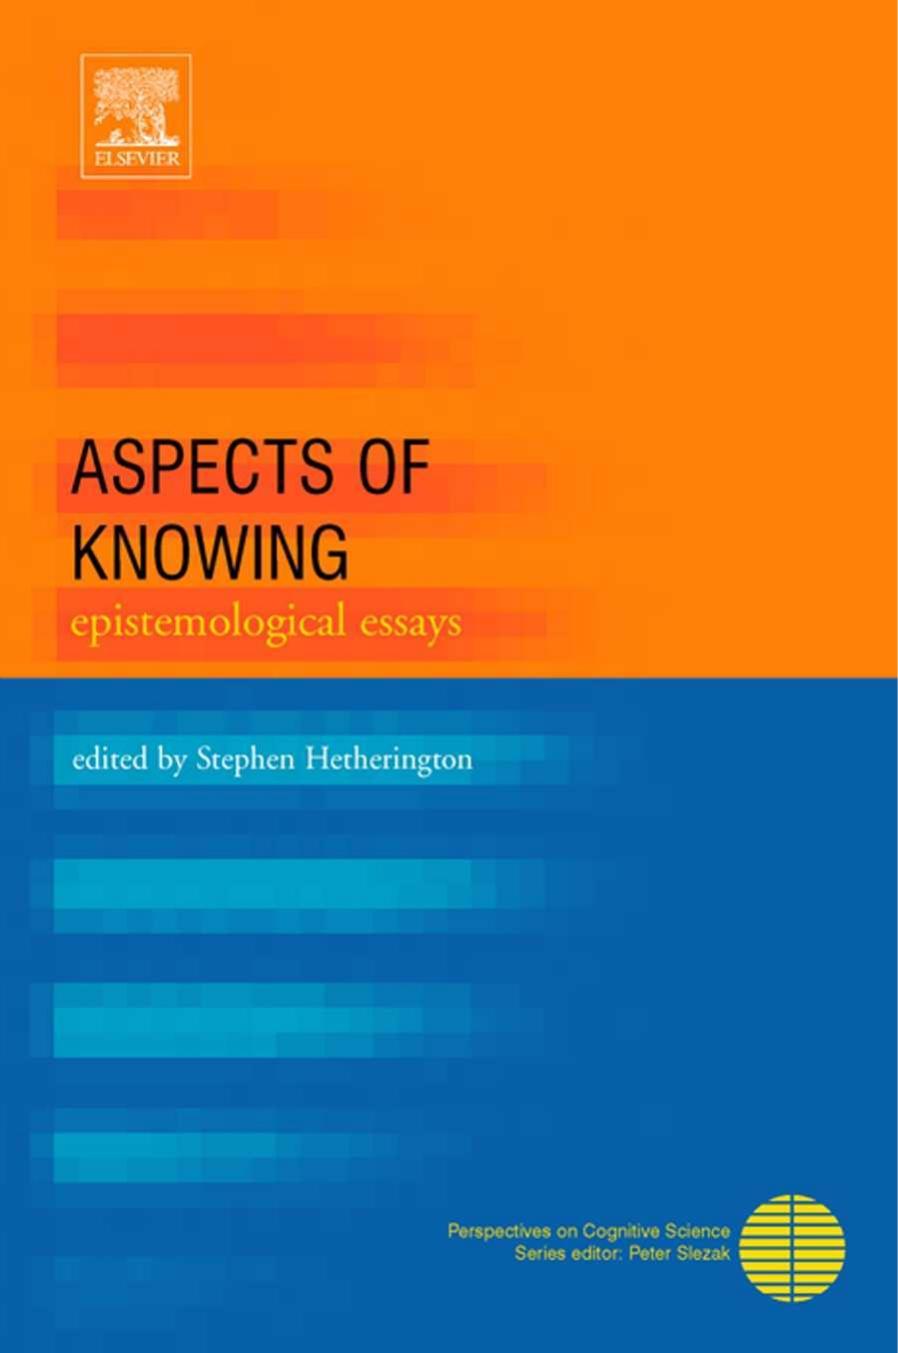 Aspects of Knowing: Epistemological Essays